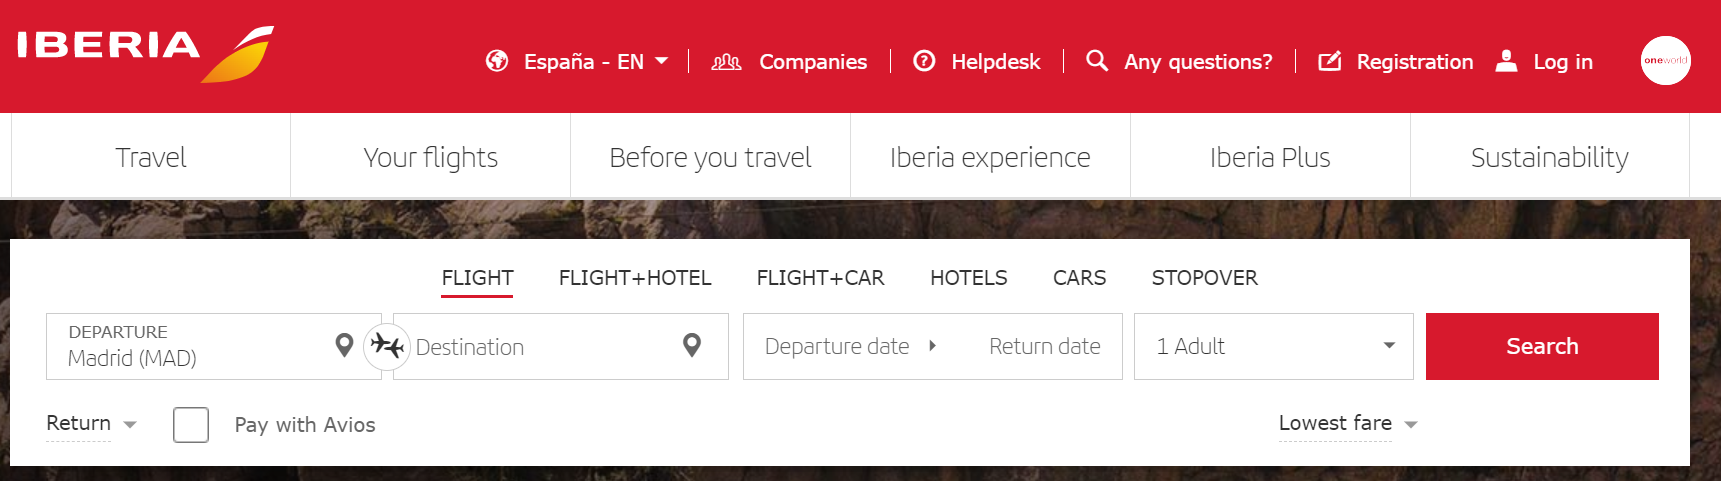 iberia airline official website